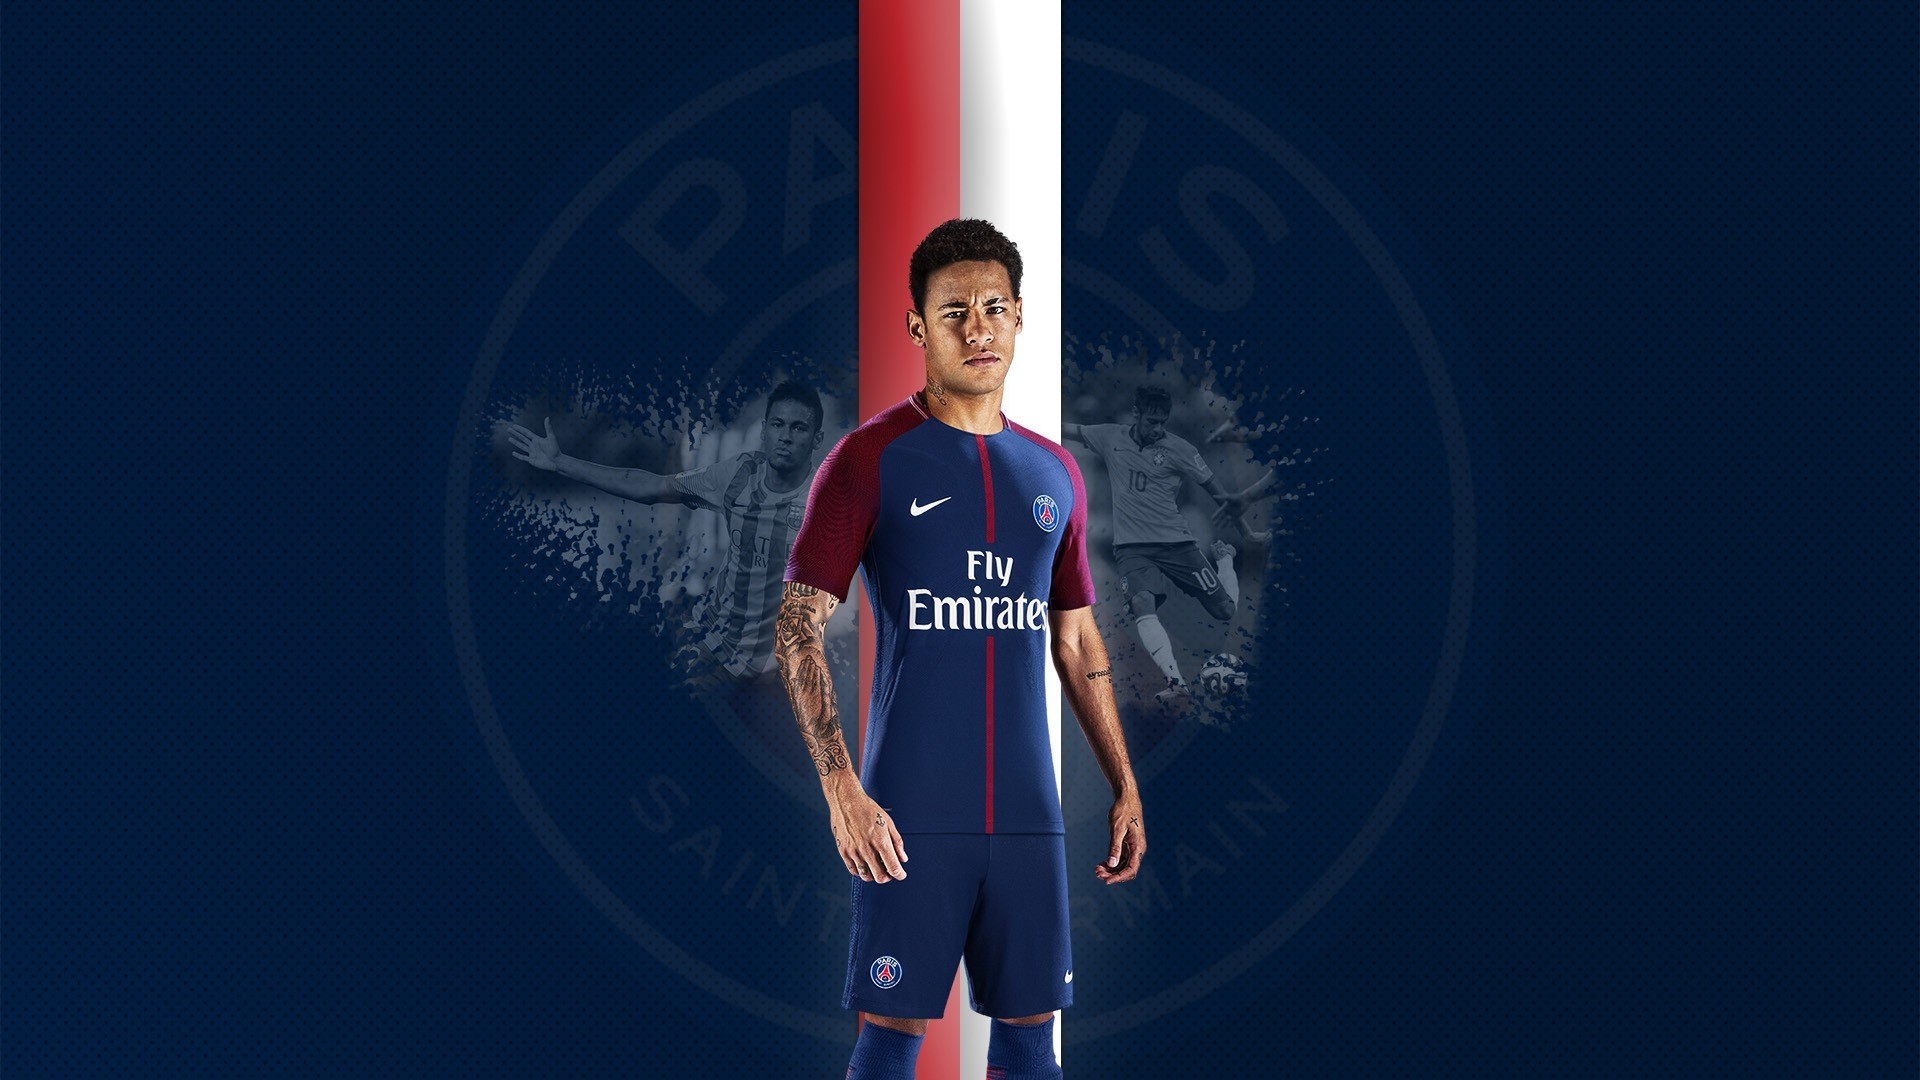 Neymar Desktop Wallpaper with resolution 1920X1080 pixel. You can use this wallpaper as background for your desktop Computer Screensavers, Android or iPhone smartphones